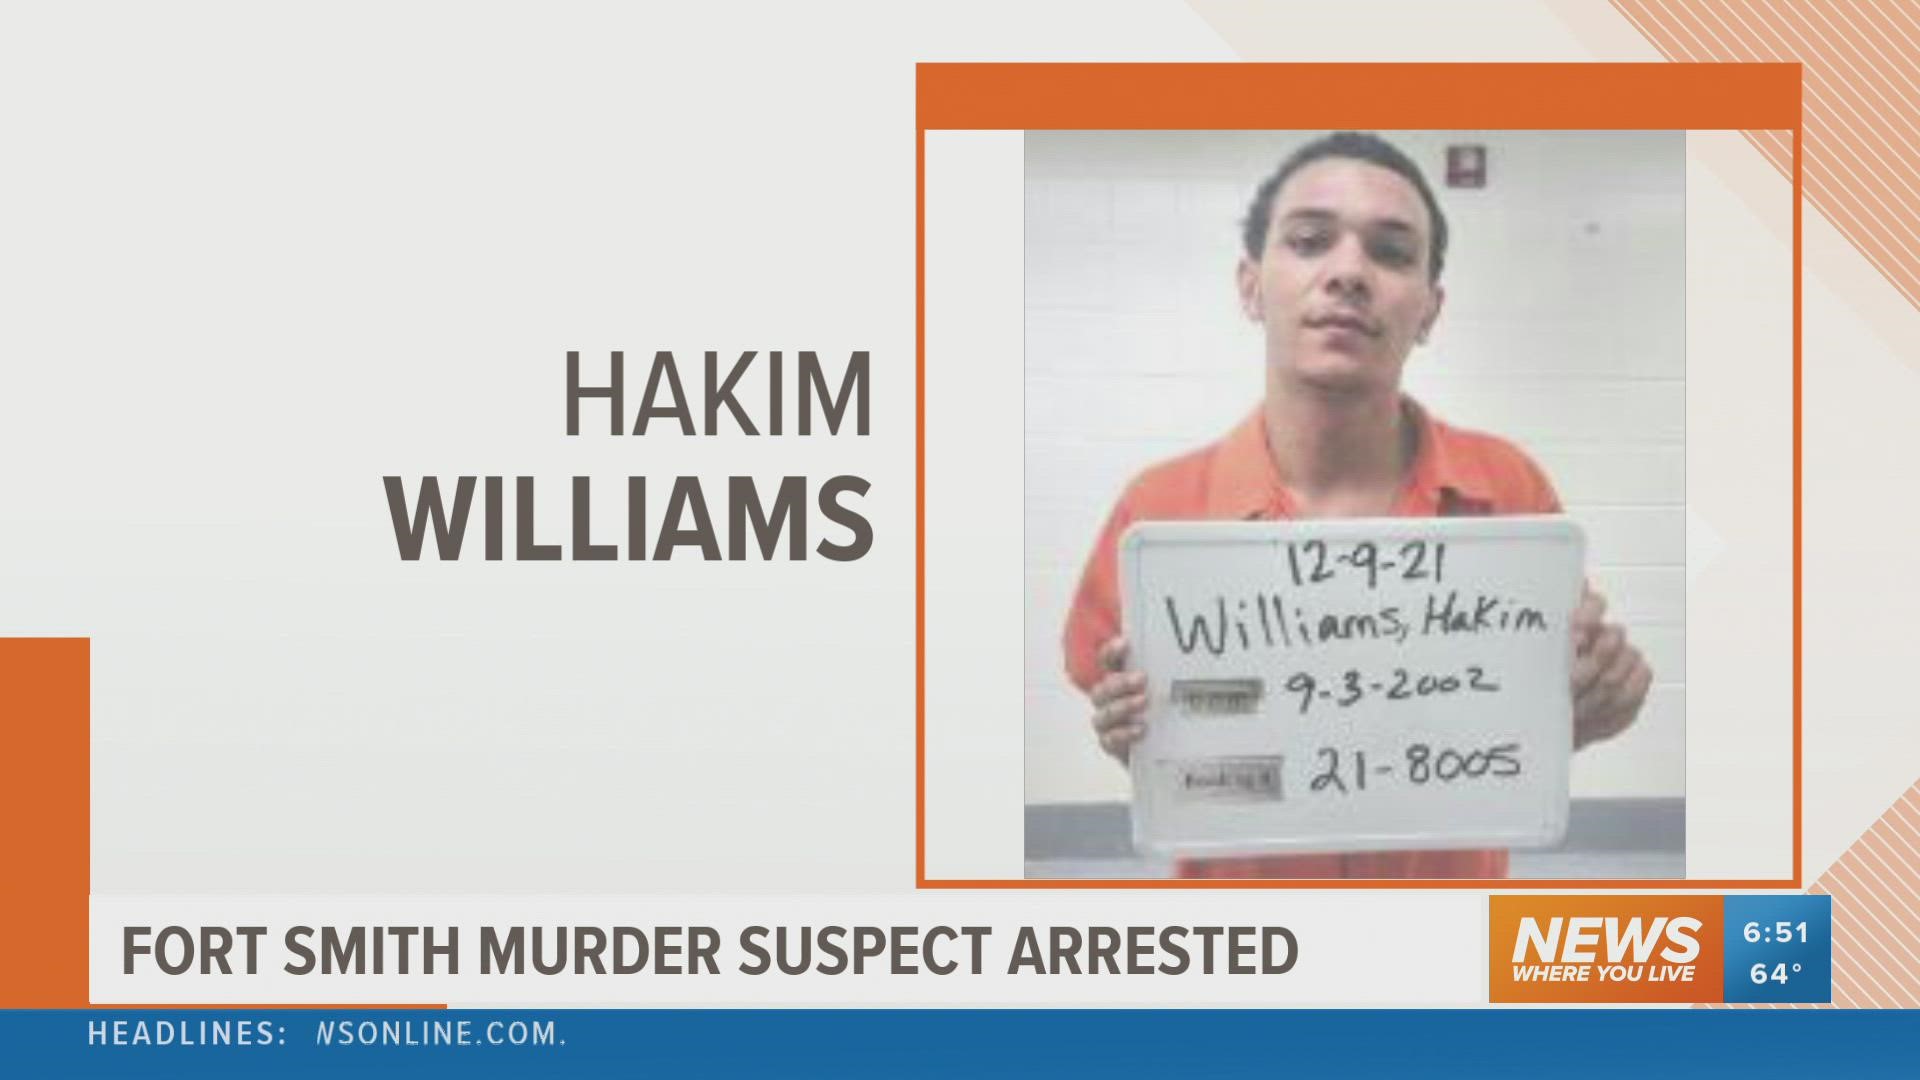 Fort Smith Police arrested 19-year-old Hakim Williams in connection to the shooting death of Jeremiah Tabut.